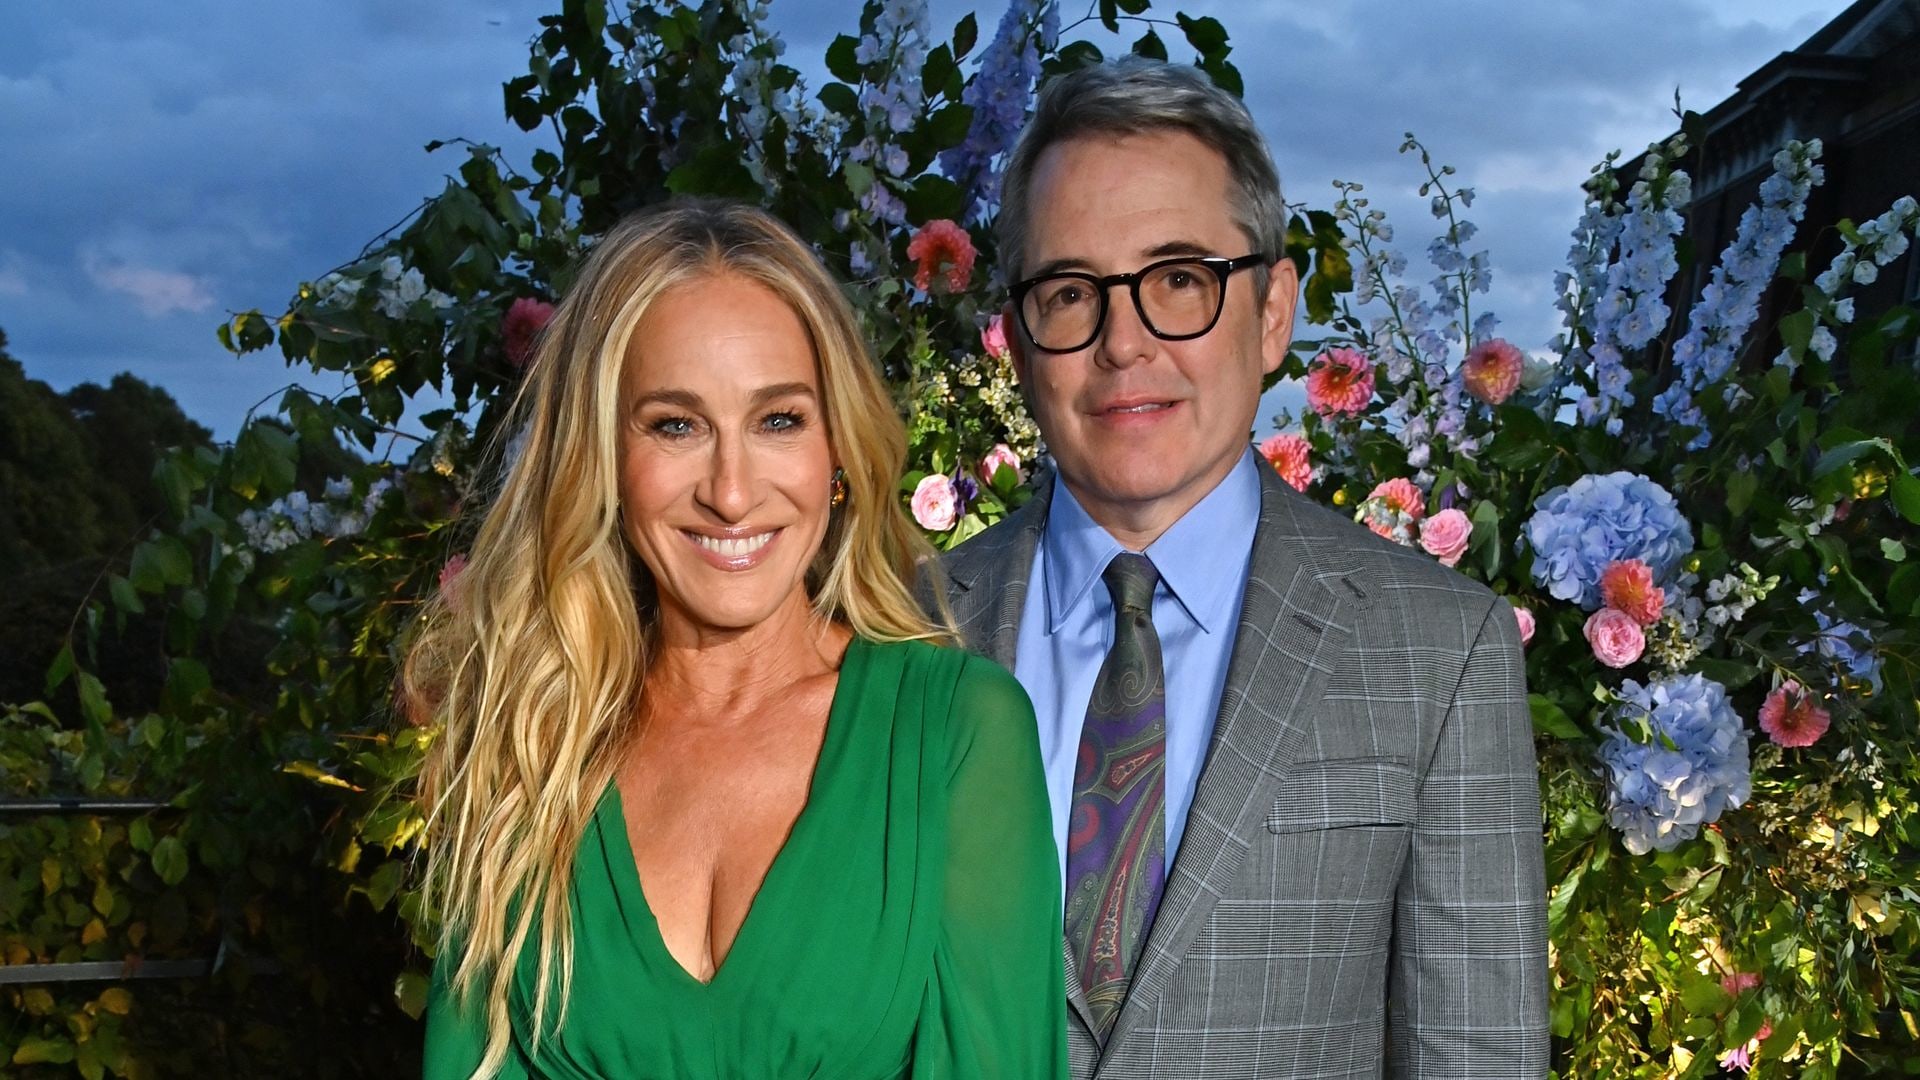 Sarah Jessica Parker turns heads in green gown with thigh-high slit as she steps out with husband Matthew Broderick